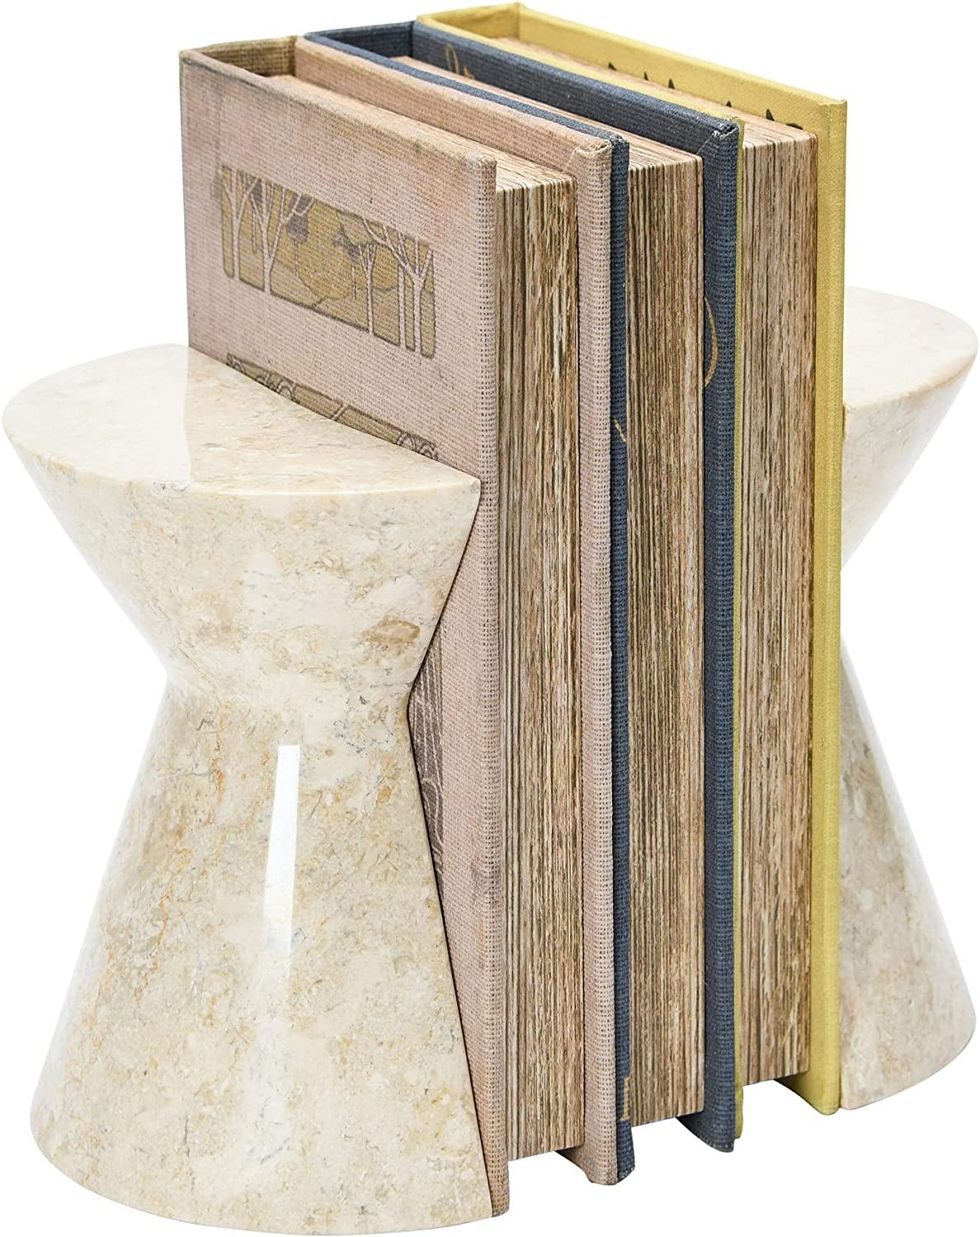 Bloomingville Natural Modern Marble Office and Home Contemporary Shelf and Table Decor Set of 2 Bookends